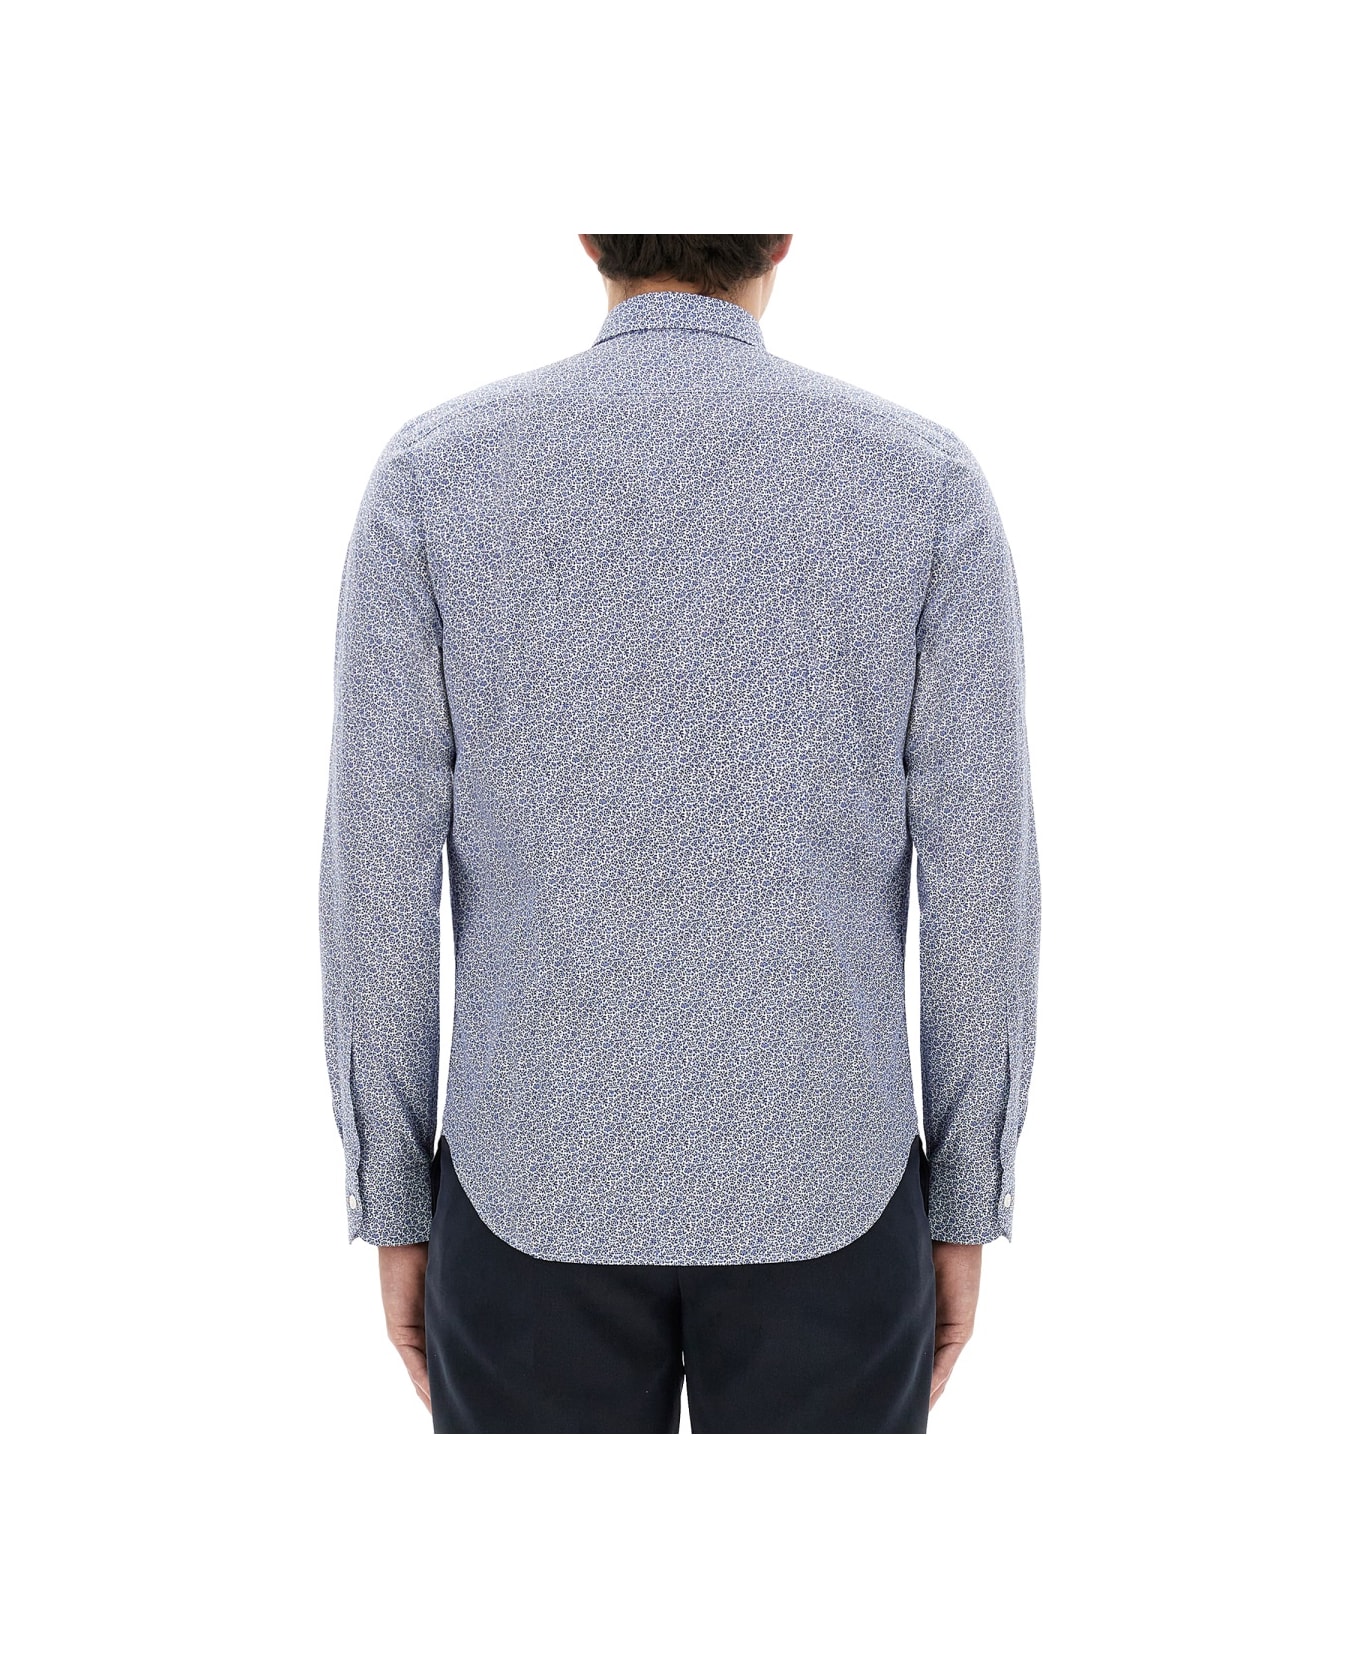 Paul Smith Shirt With Floral Pattern - AZURE シャツ